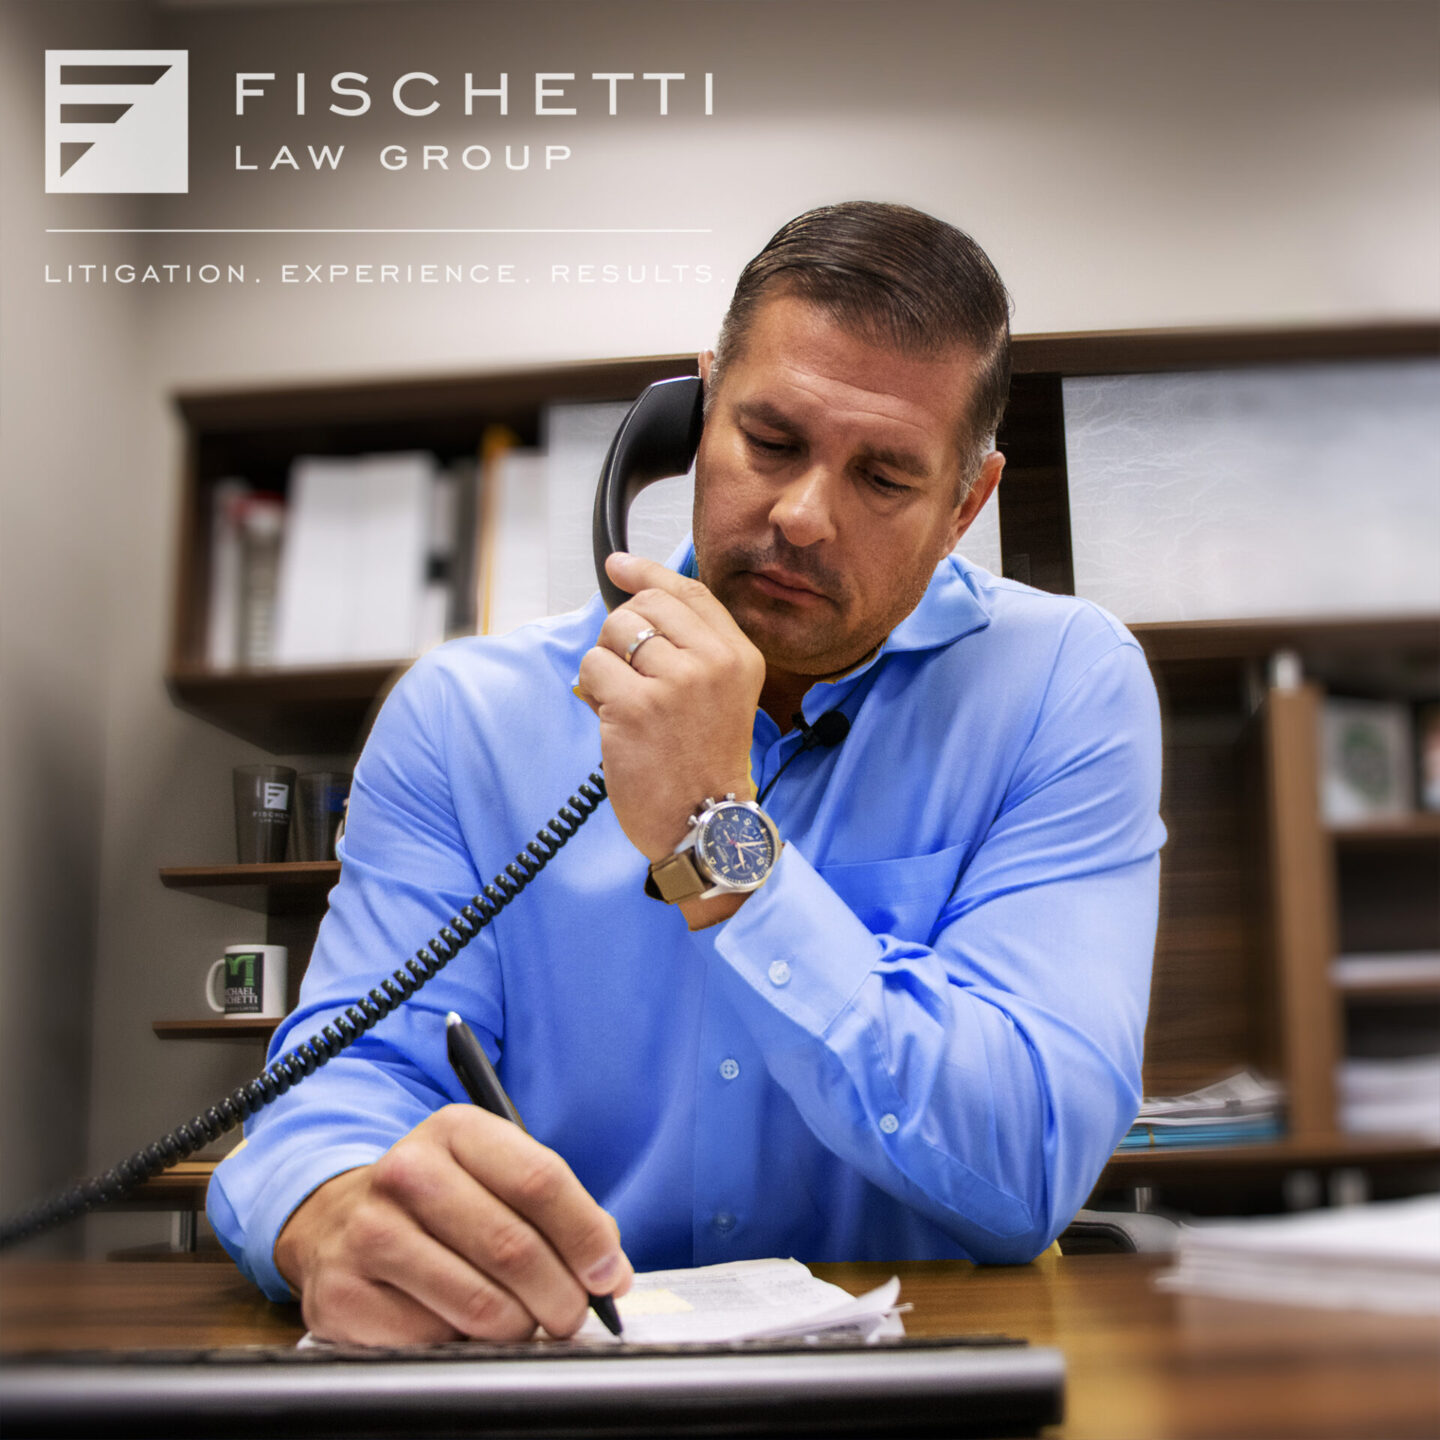 Pompano Beach Personal Injury Lawyer - Personal Injury Lawyer Pompano Beach Florida - Fischetti Law Group